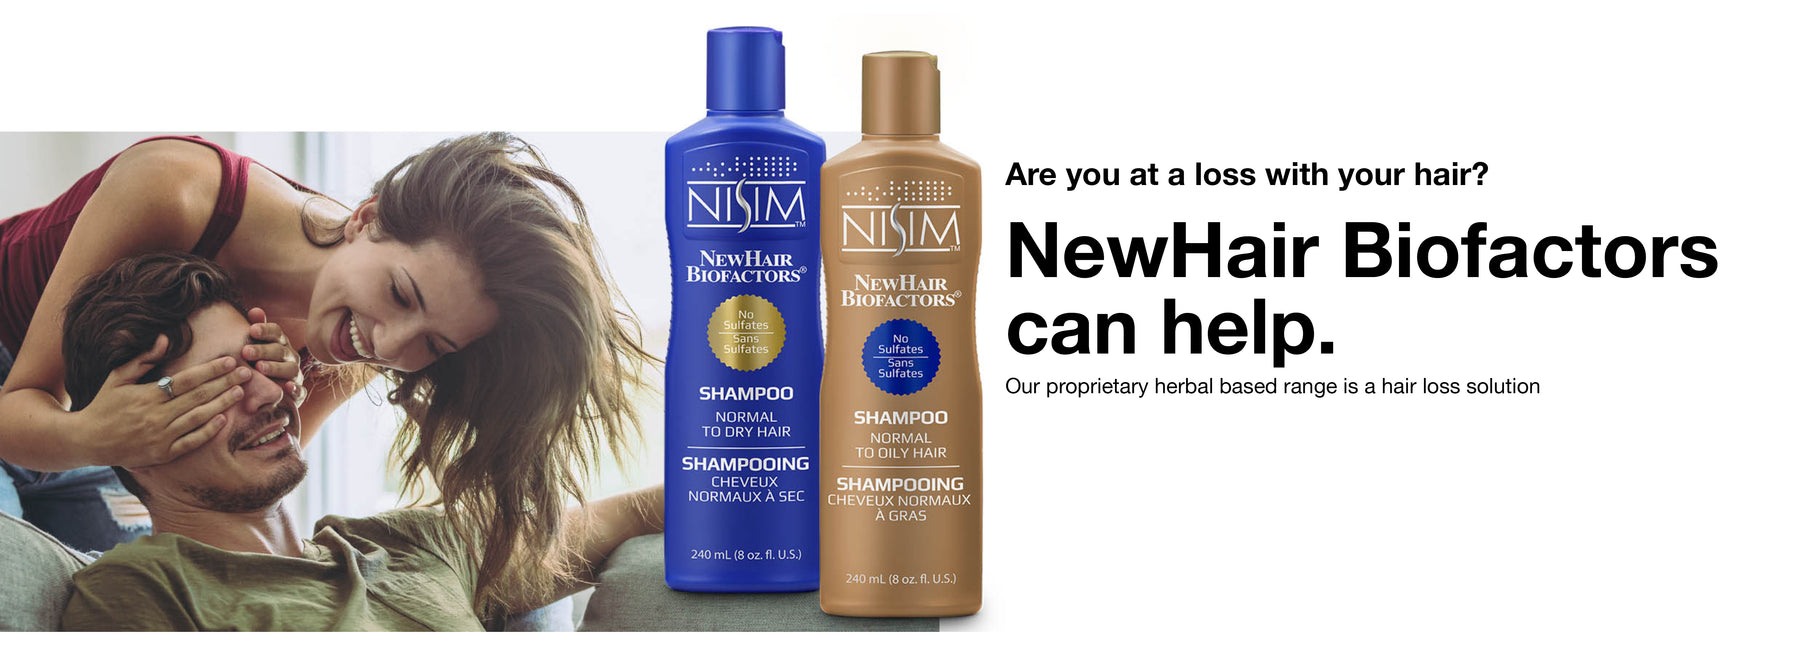 Shop Nisim for your hair loss shampoos and treatments